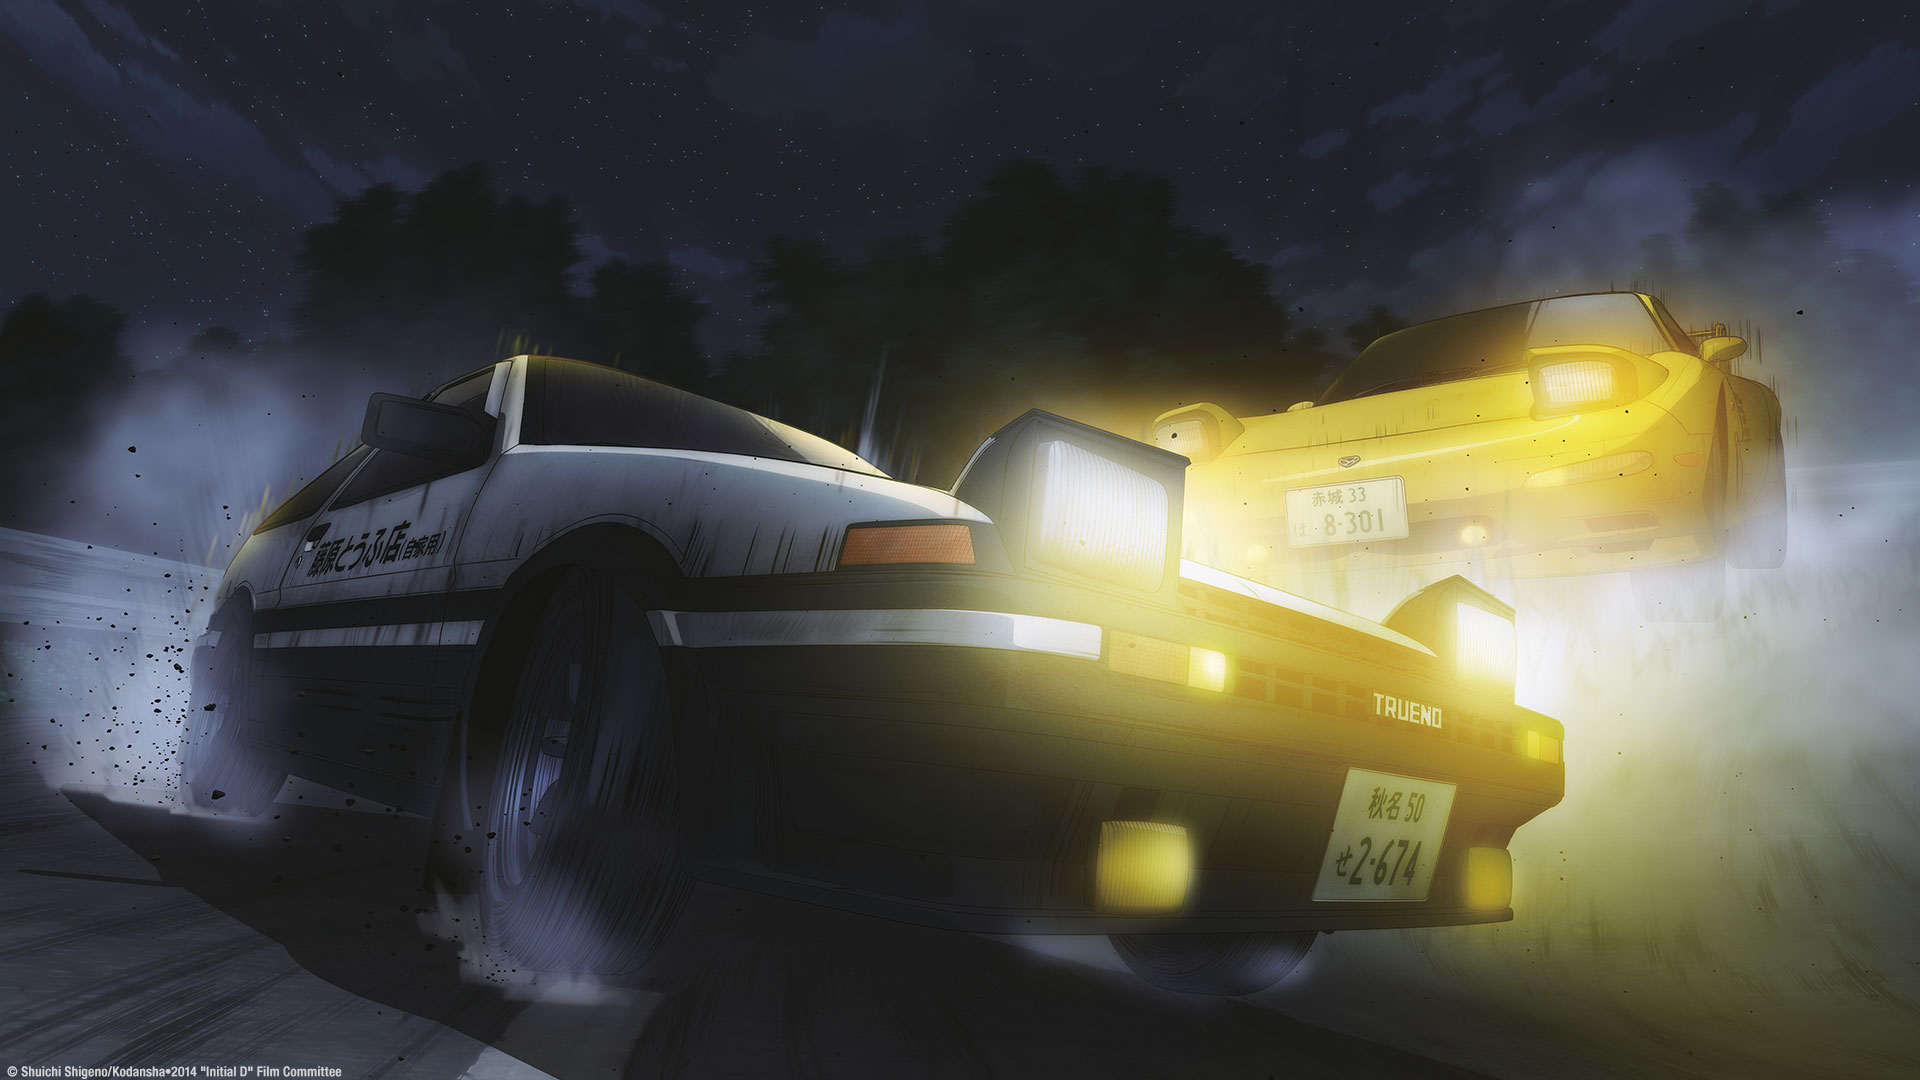 If you are even slightly interested in car racing Anime, New Initial D movies are for you.